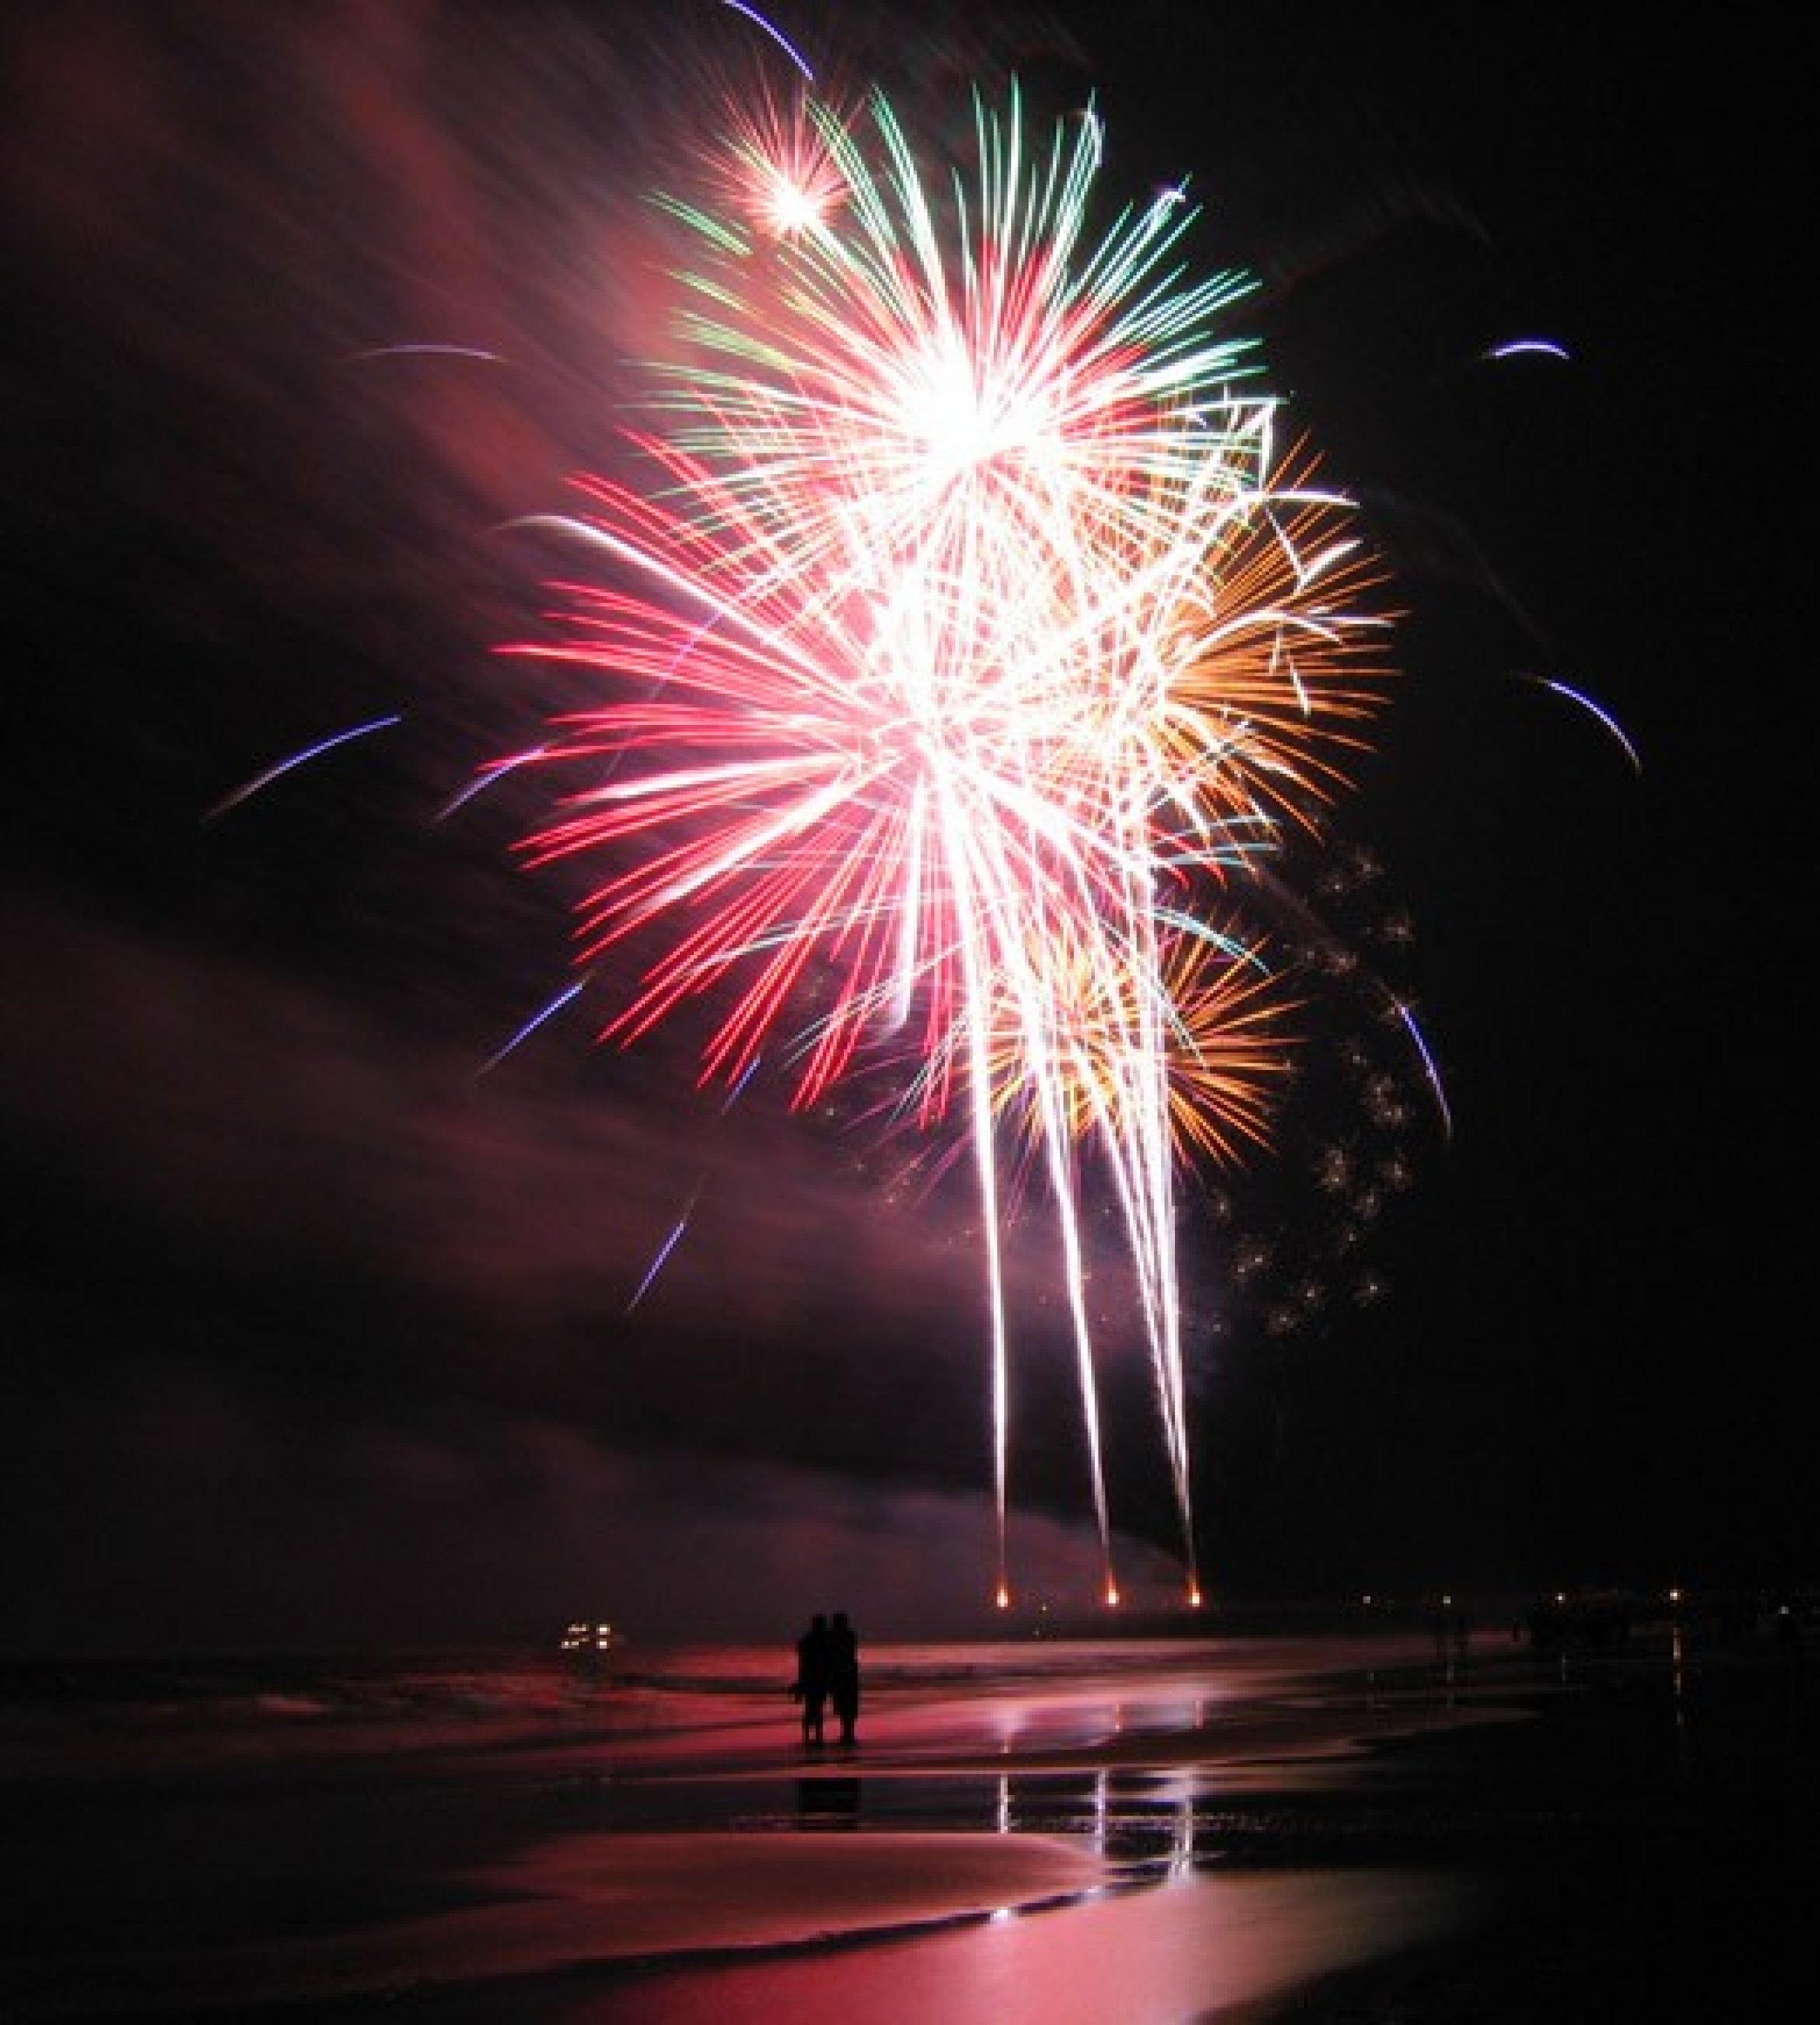 A collection of palm-shell fireworks illuminating the beach of Tybee Island, Georgia.